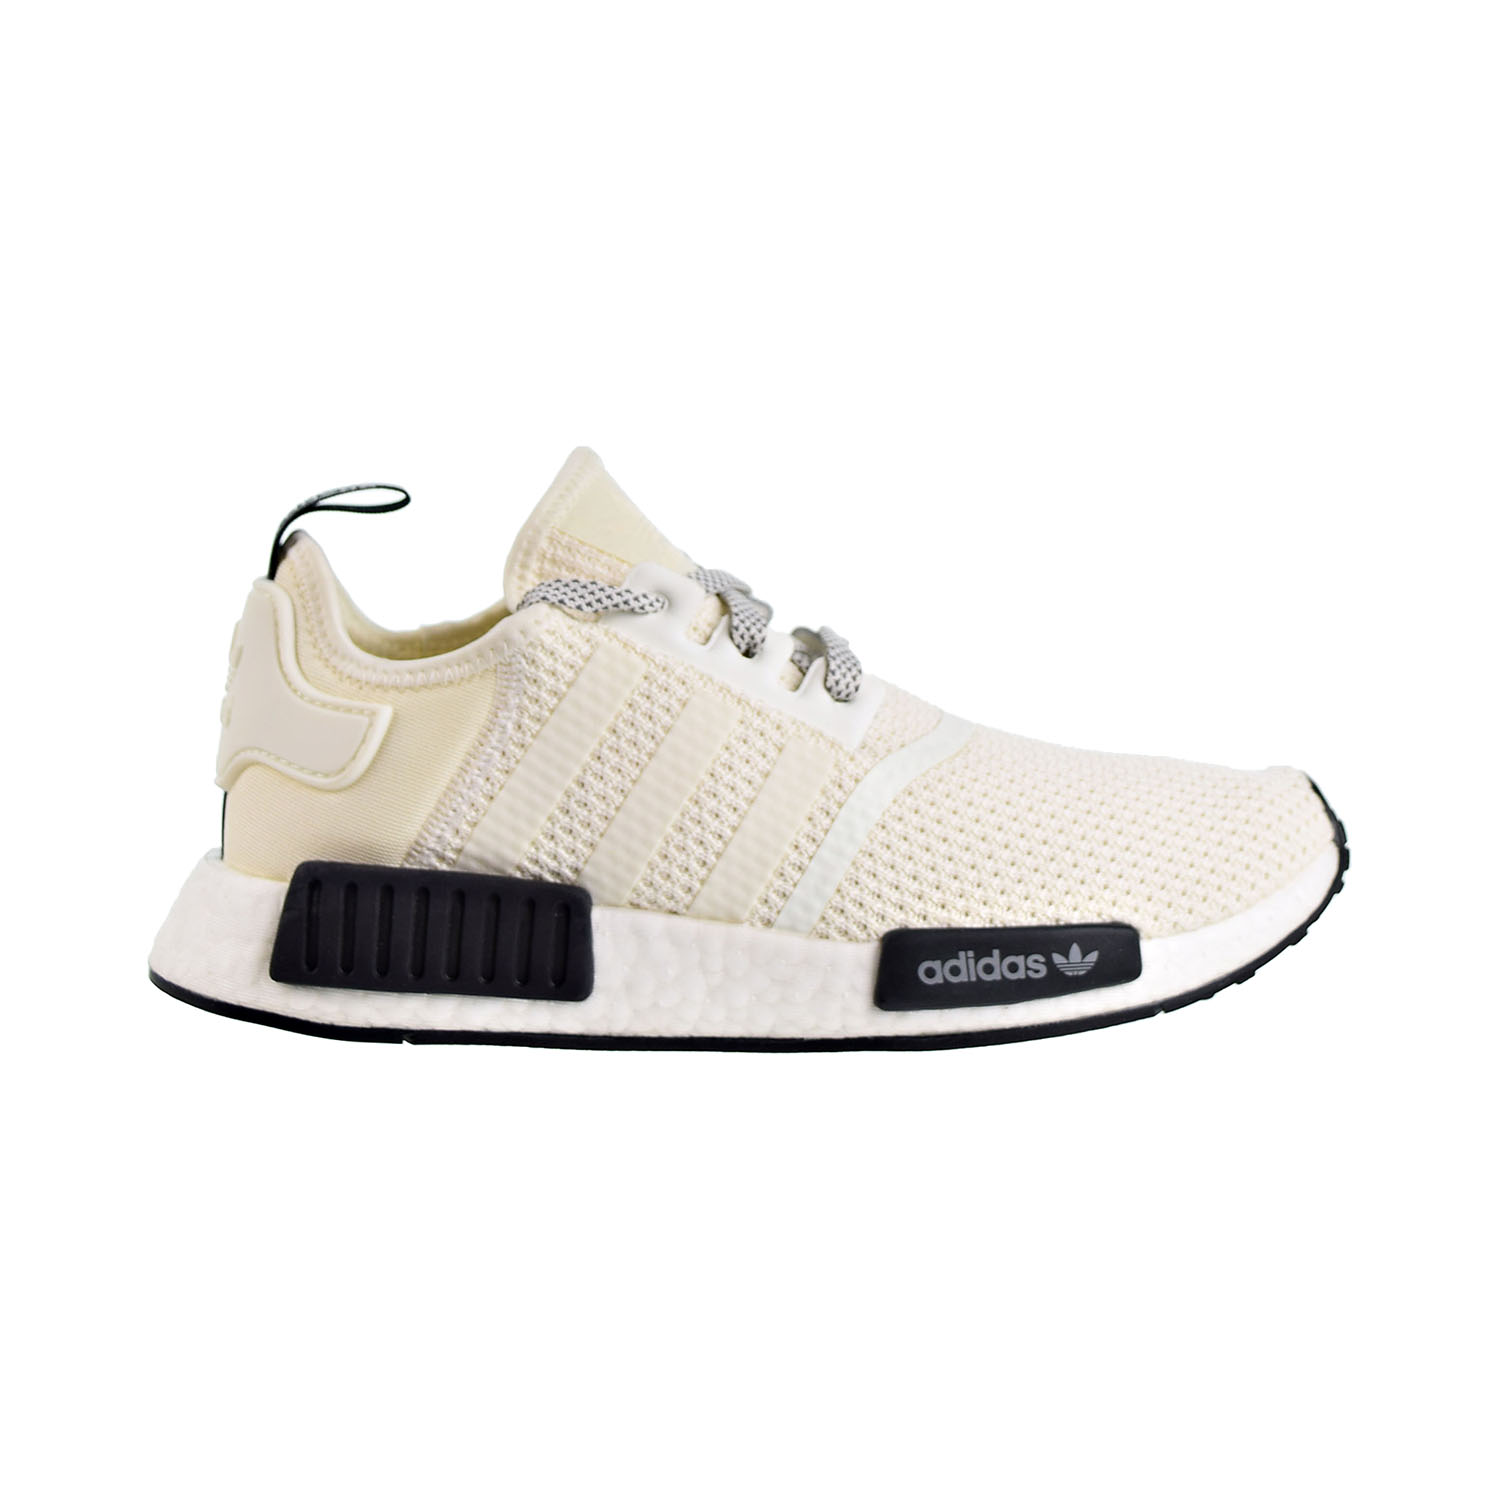 Adidas NMD_R1 Mens Shoes Off White 